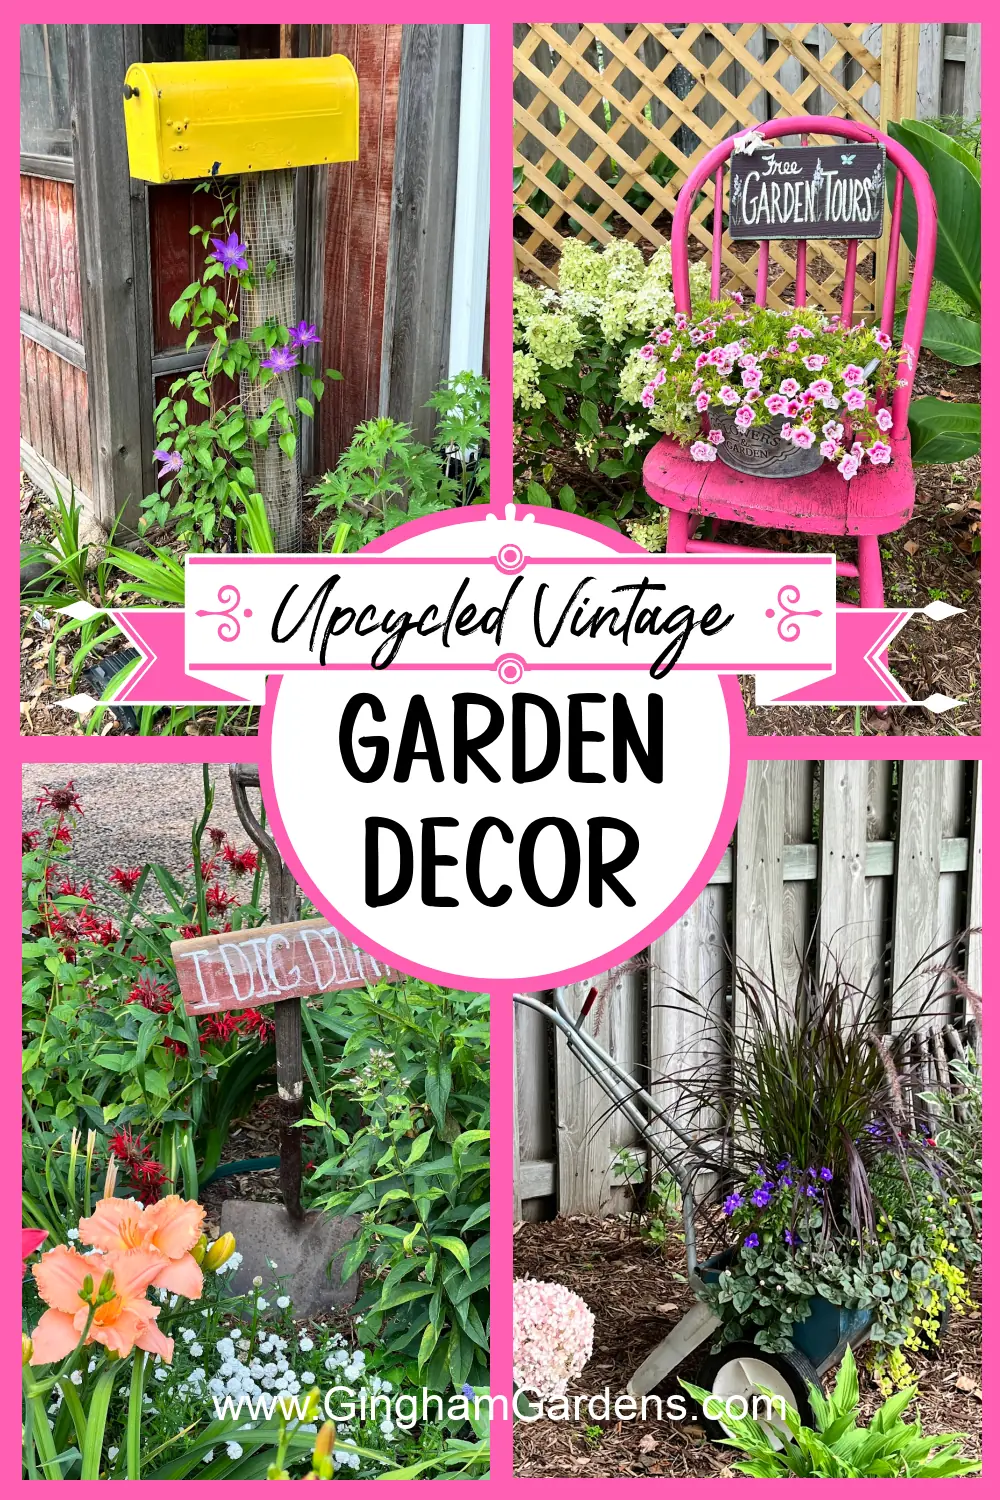 Images of rustic garden decor with text overlay - Upcycled Vintage Garden Decor